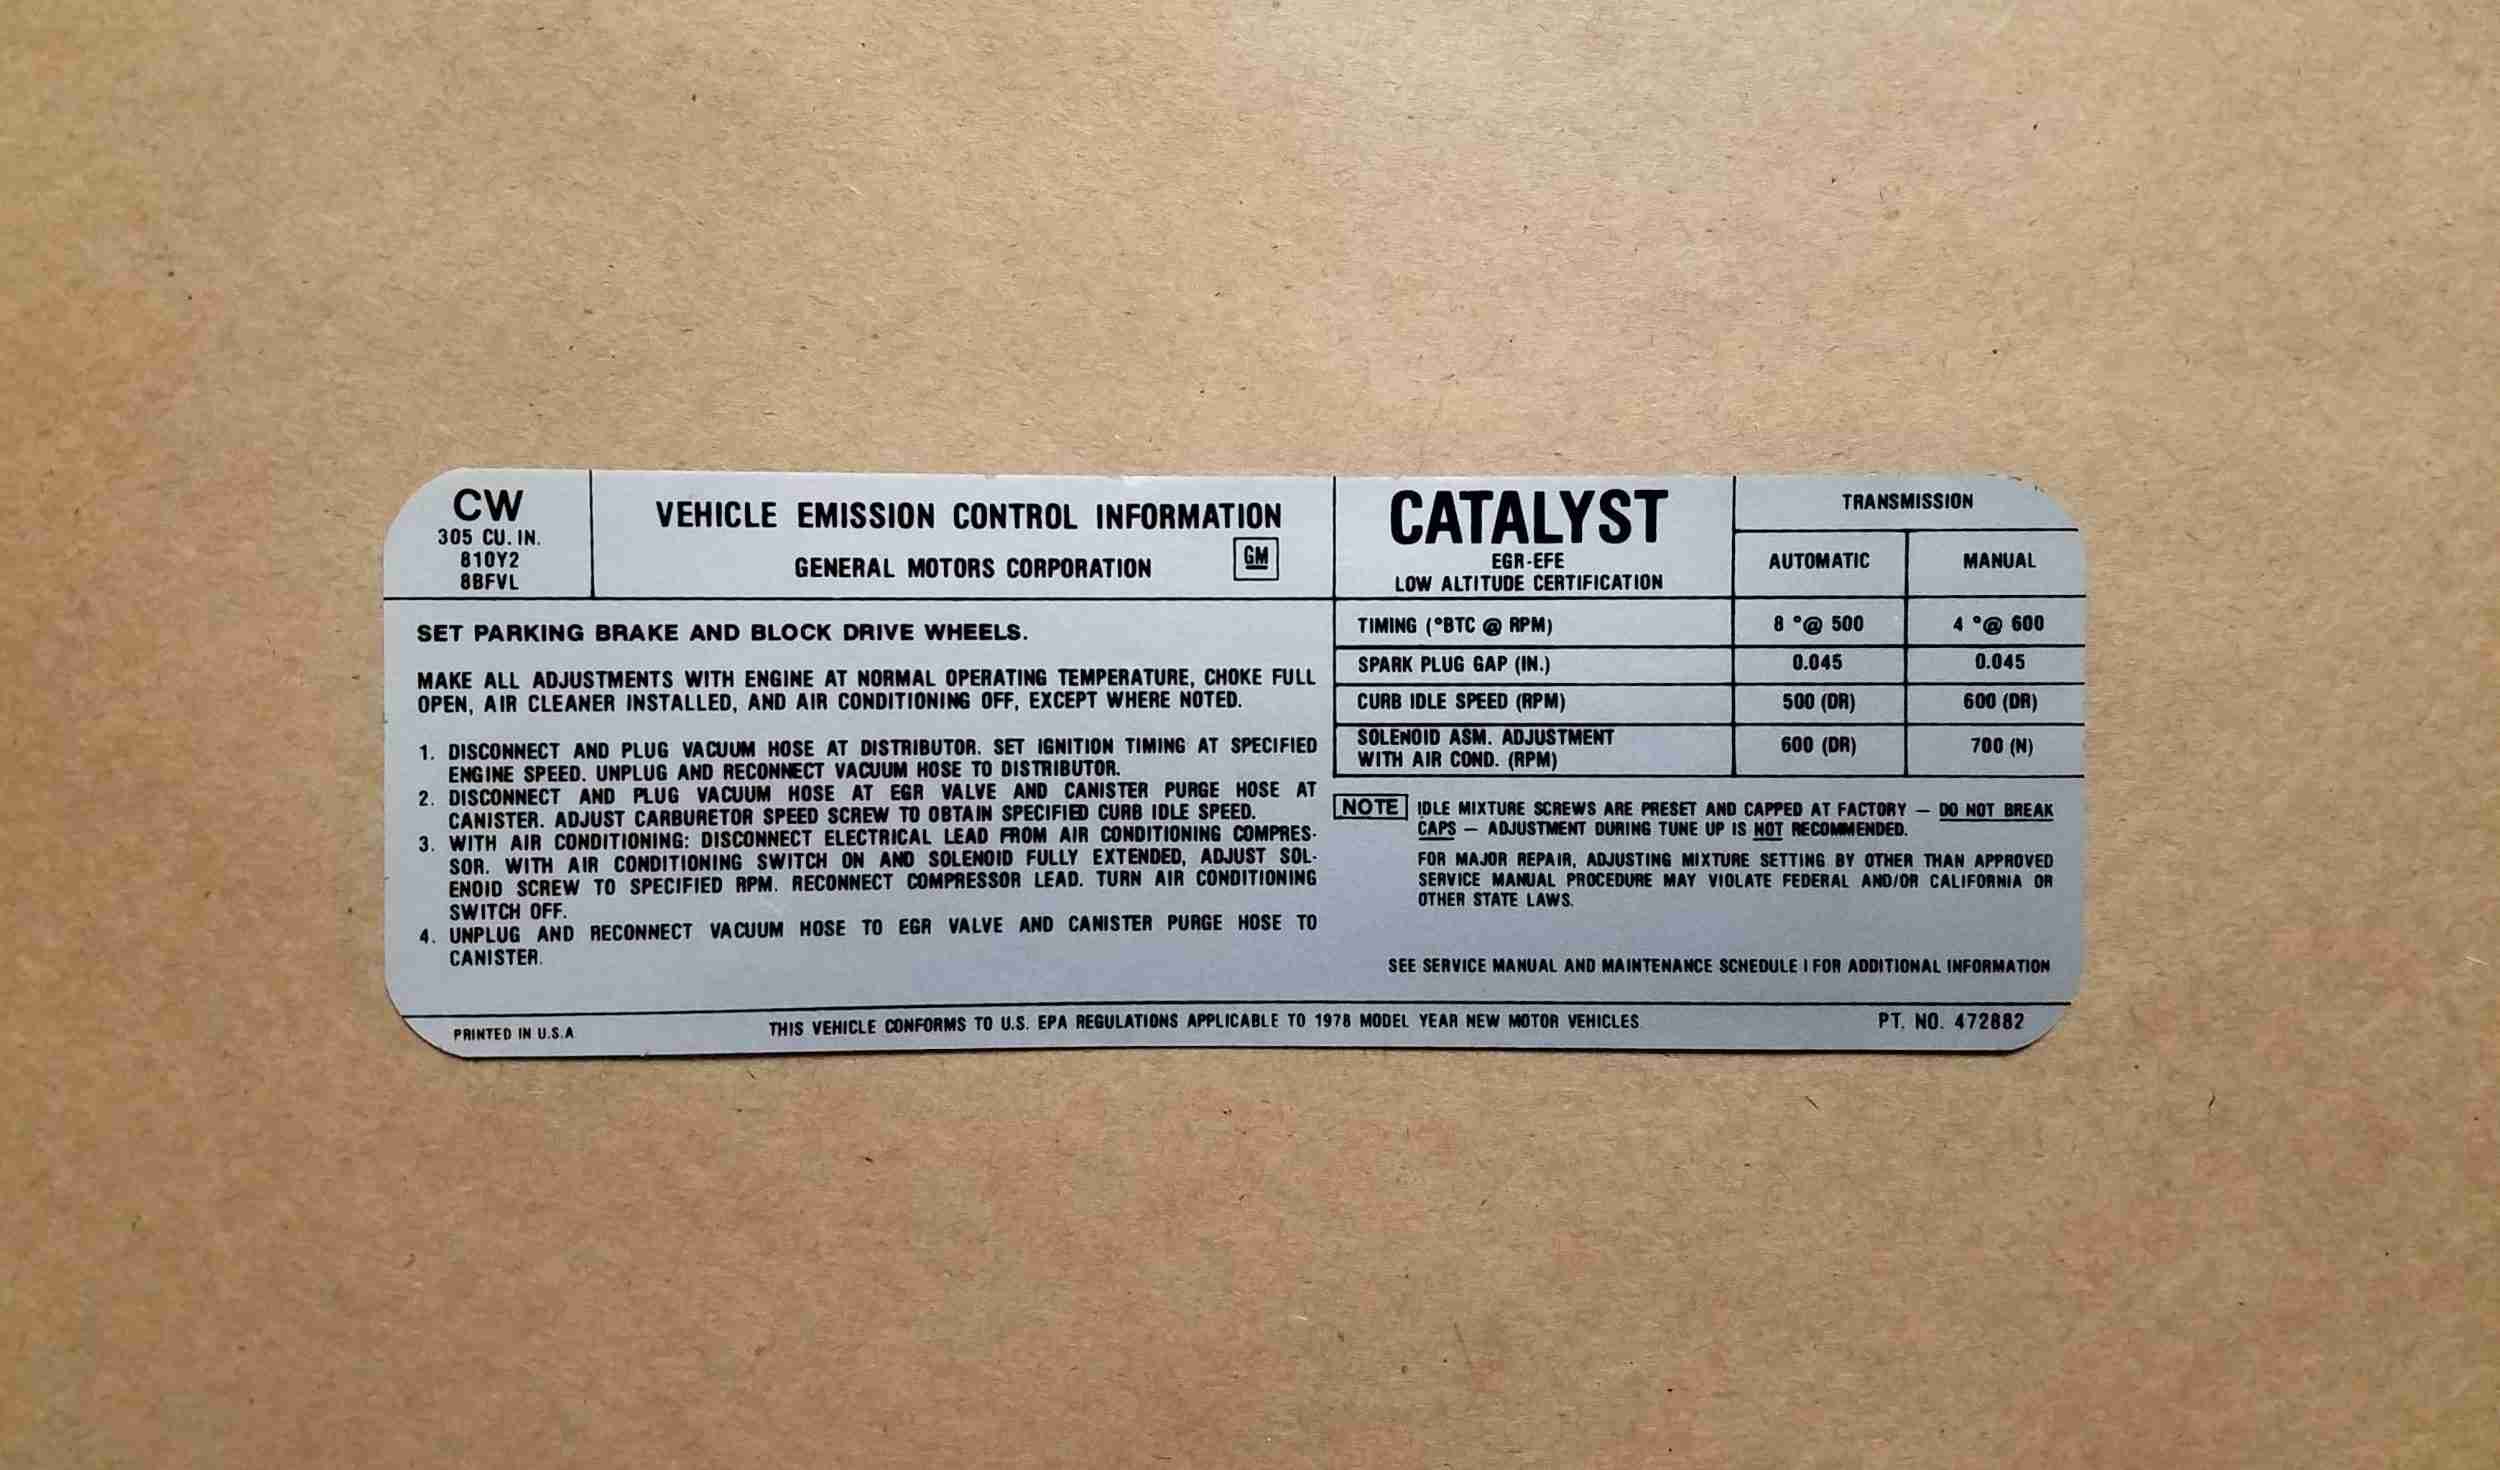 Decal, 305-2V AT/MT Emission, US (On Decal: CW 472882)